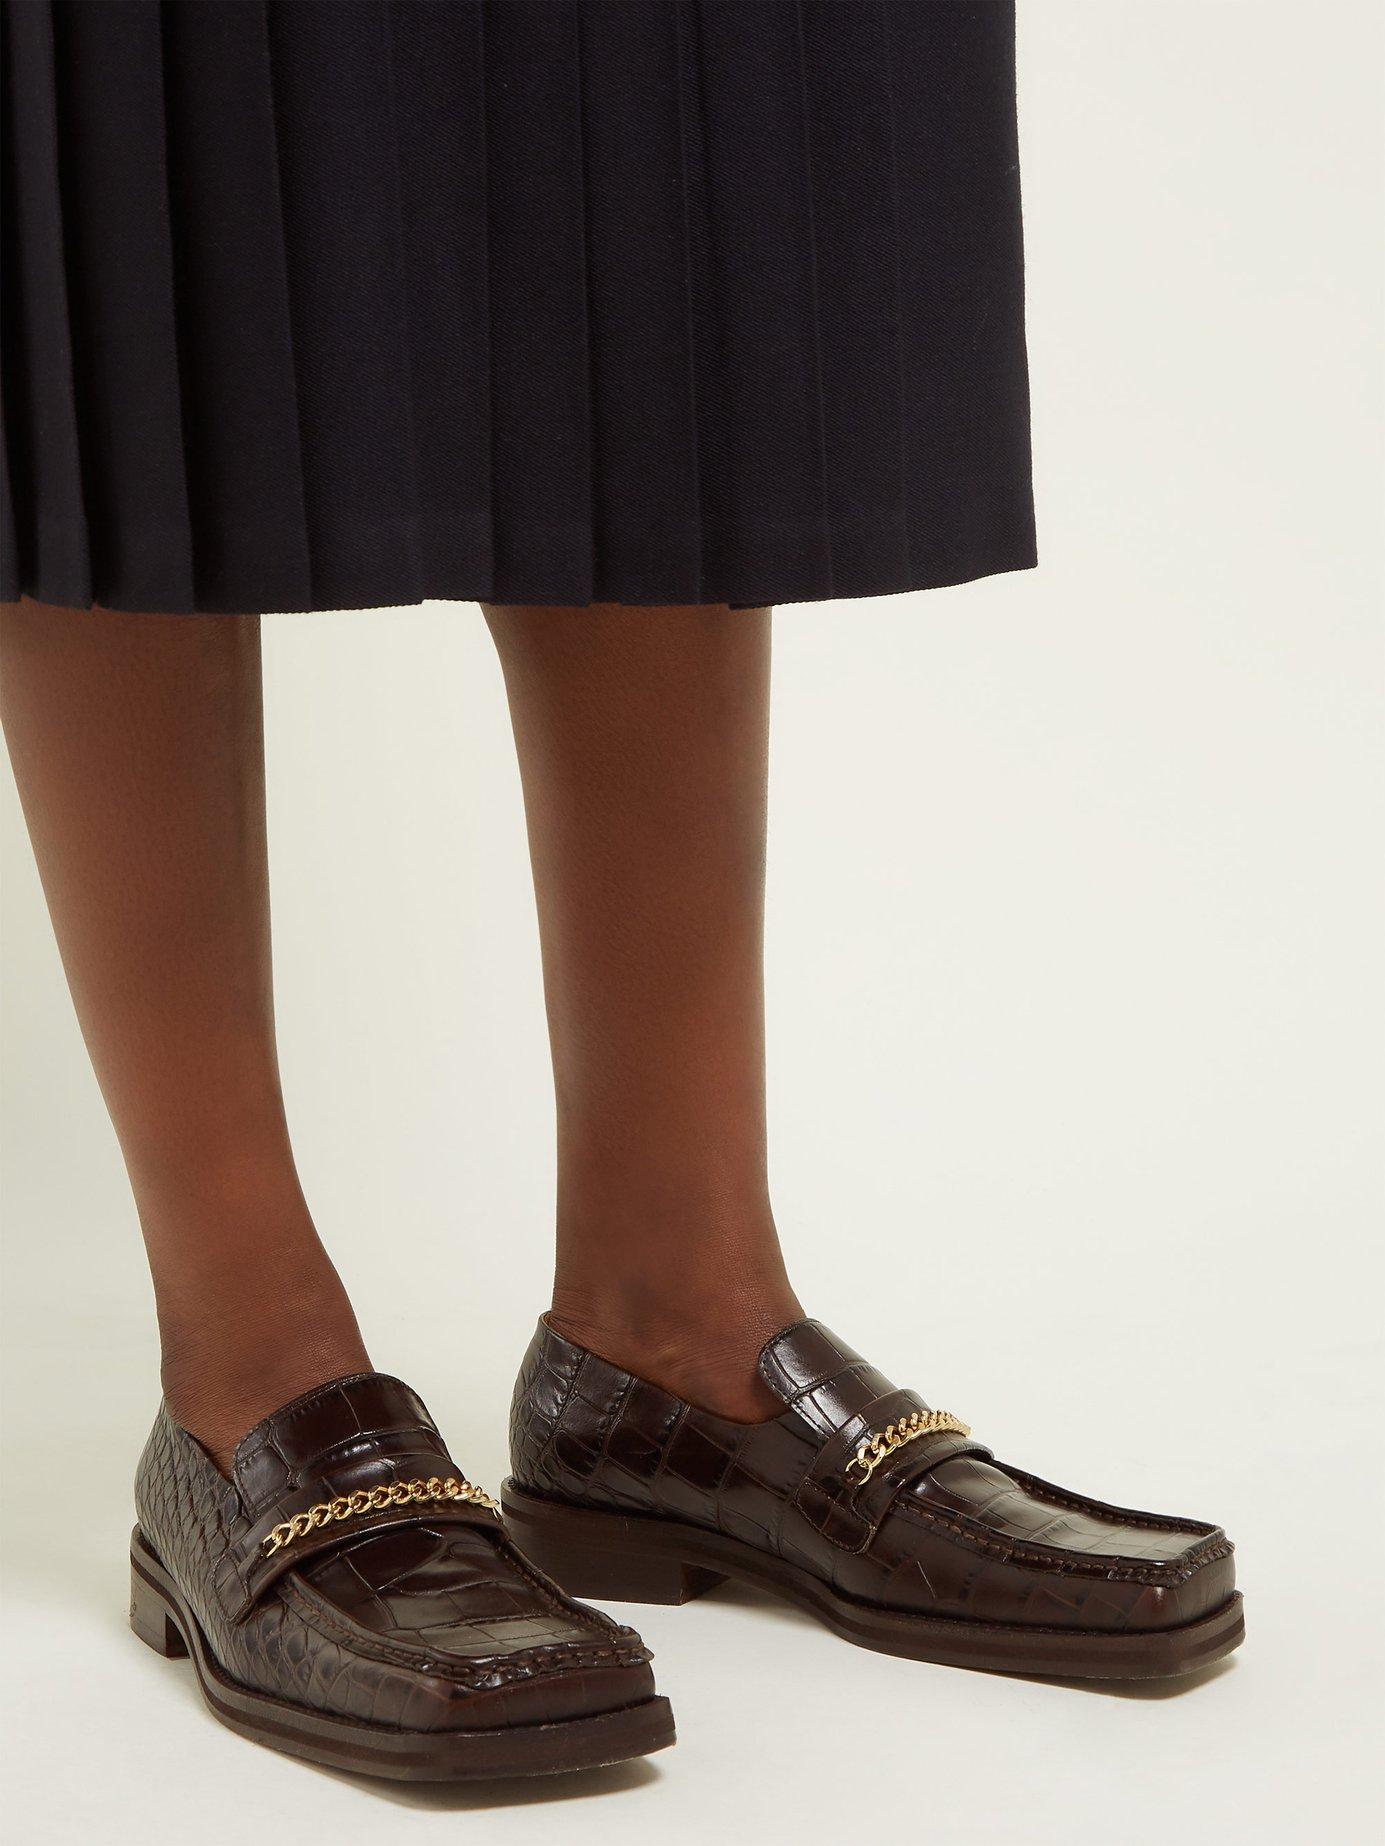 Martine Rose Square Toe Crocodile Effect Leather Loafers in Brown | Lyst